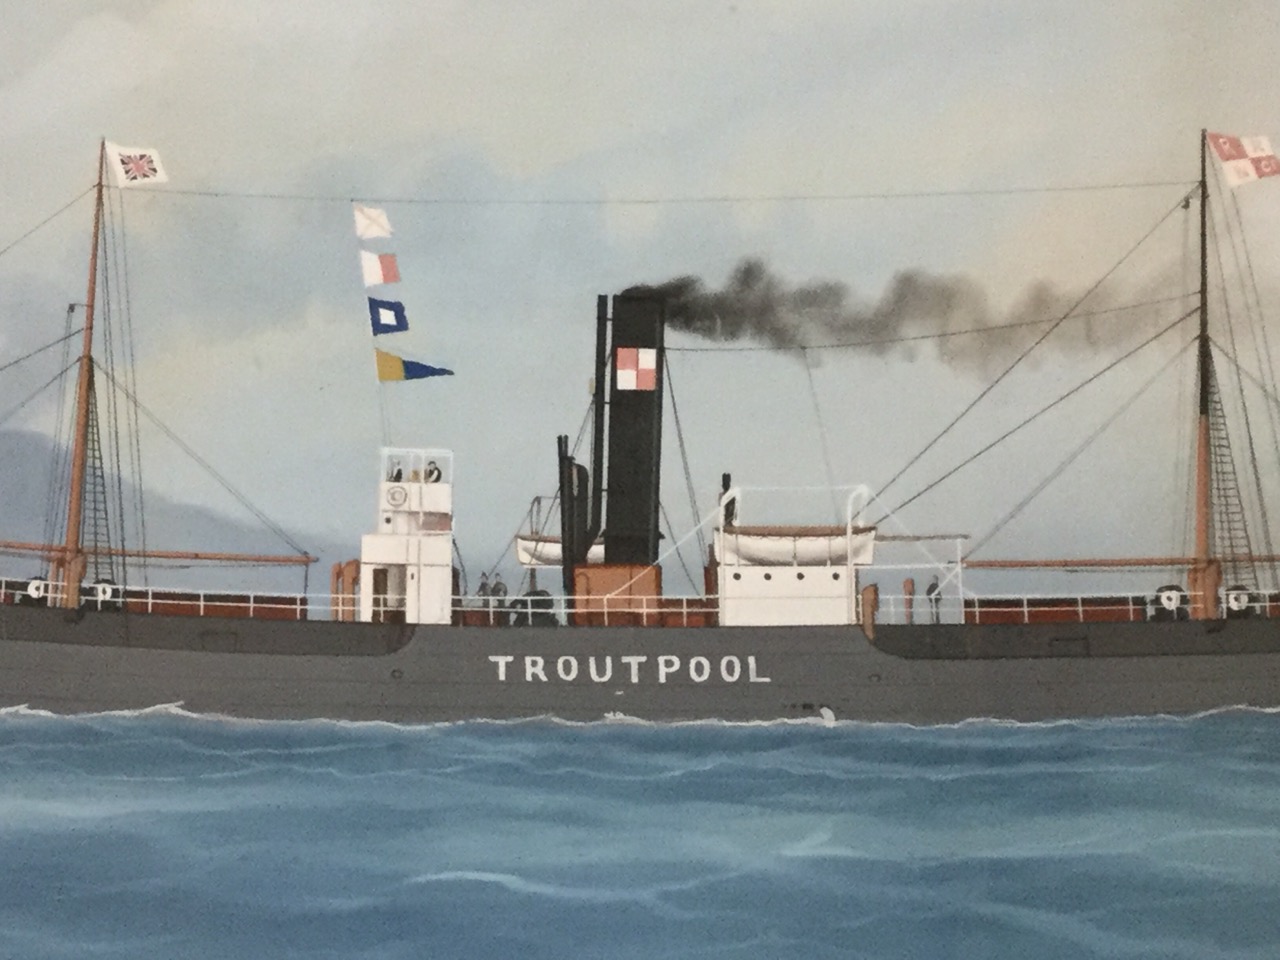 Watercolour & gouache, a study of Troutpool cargo ship under full steam, with figures on deck and - Bild 2 aus 3